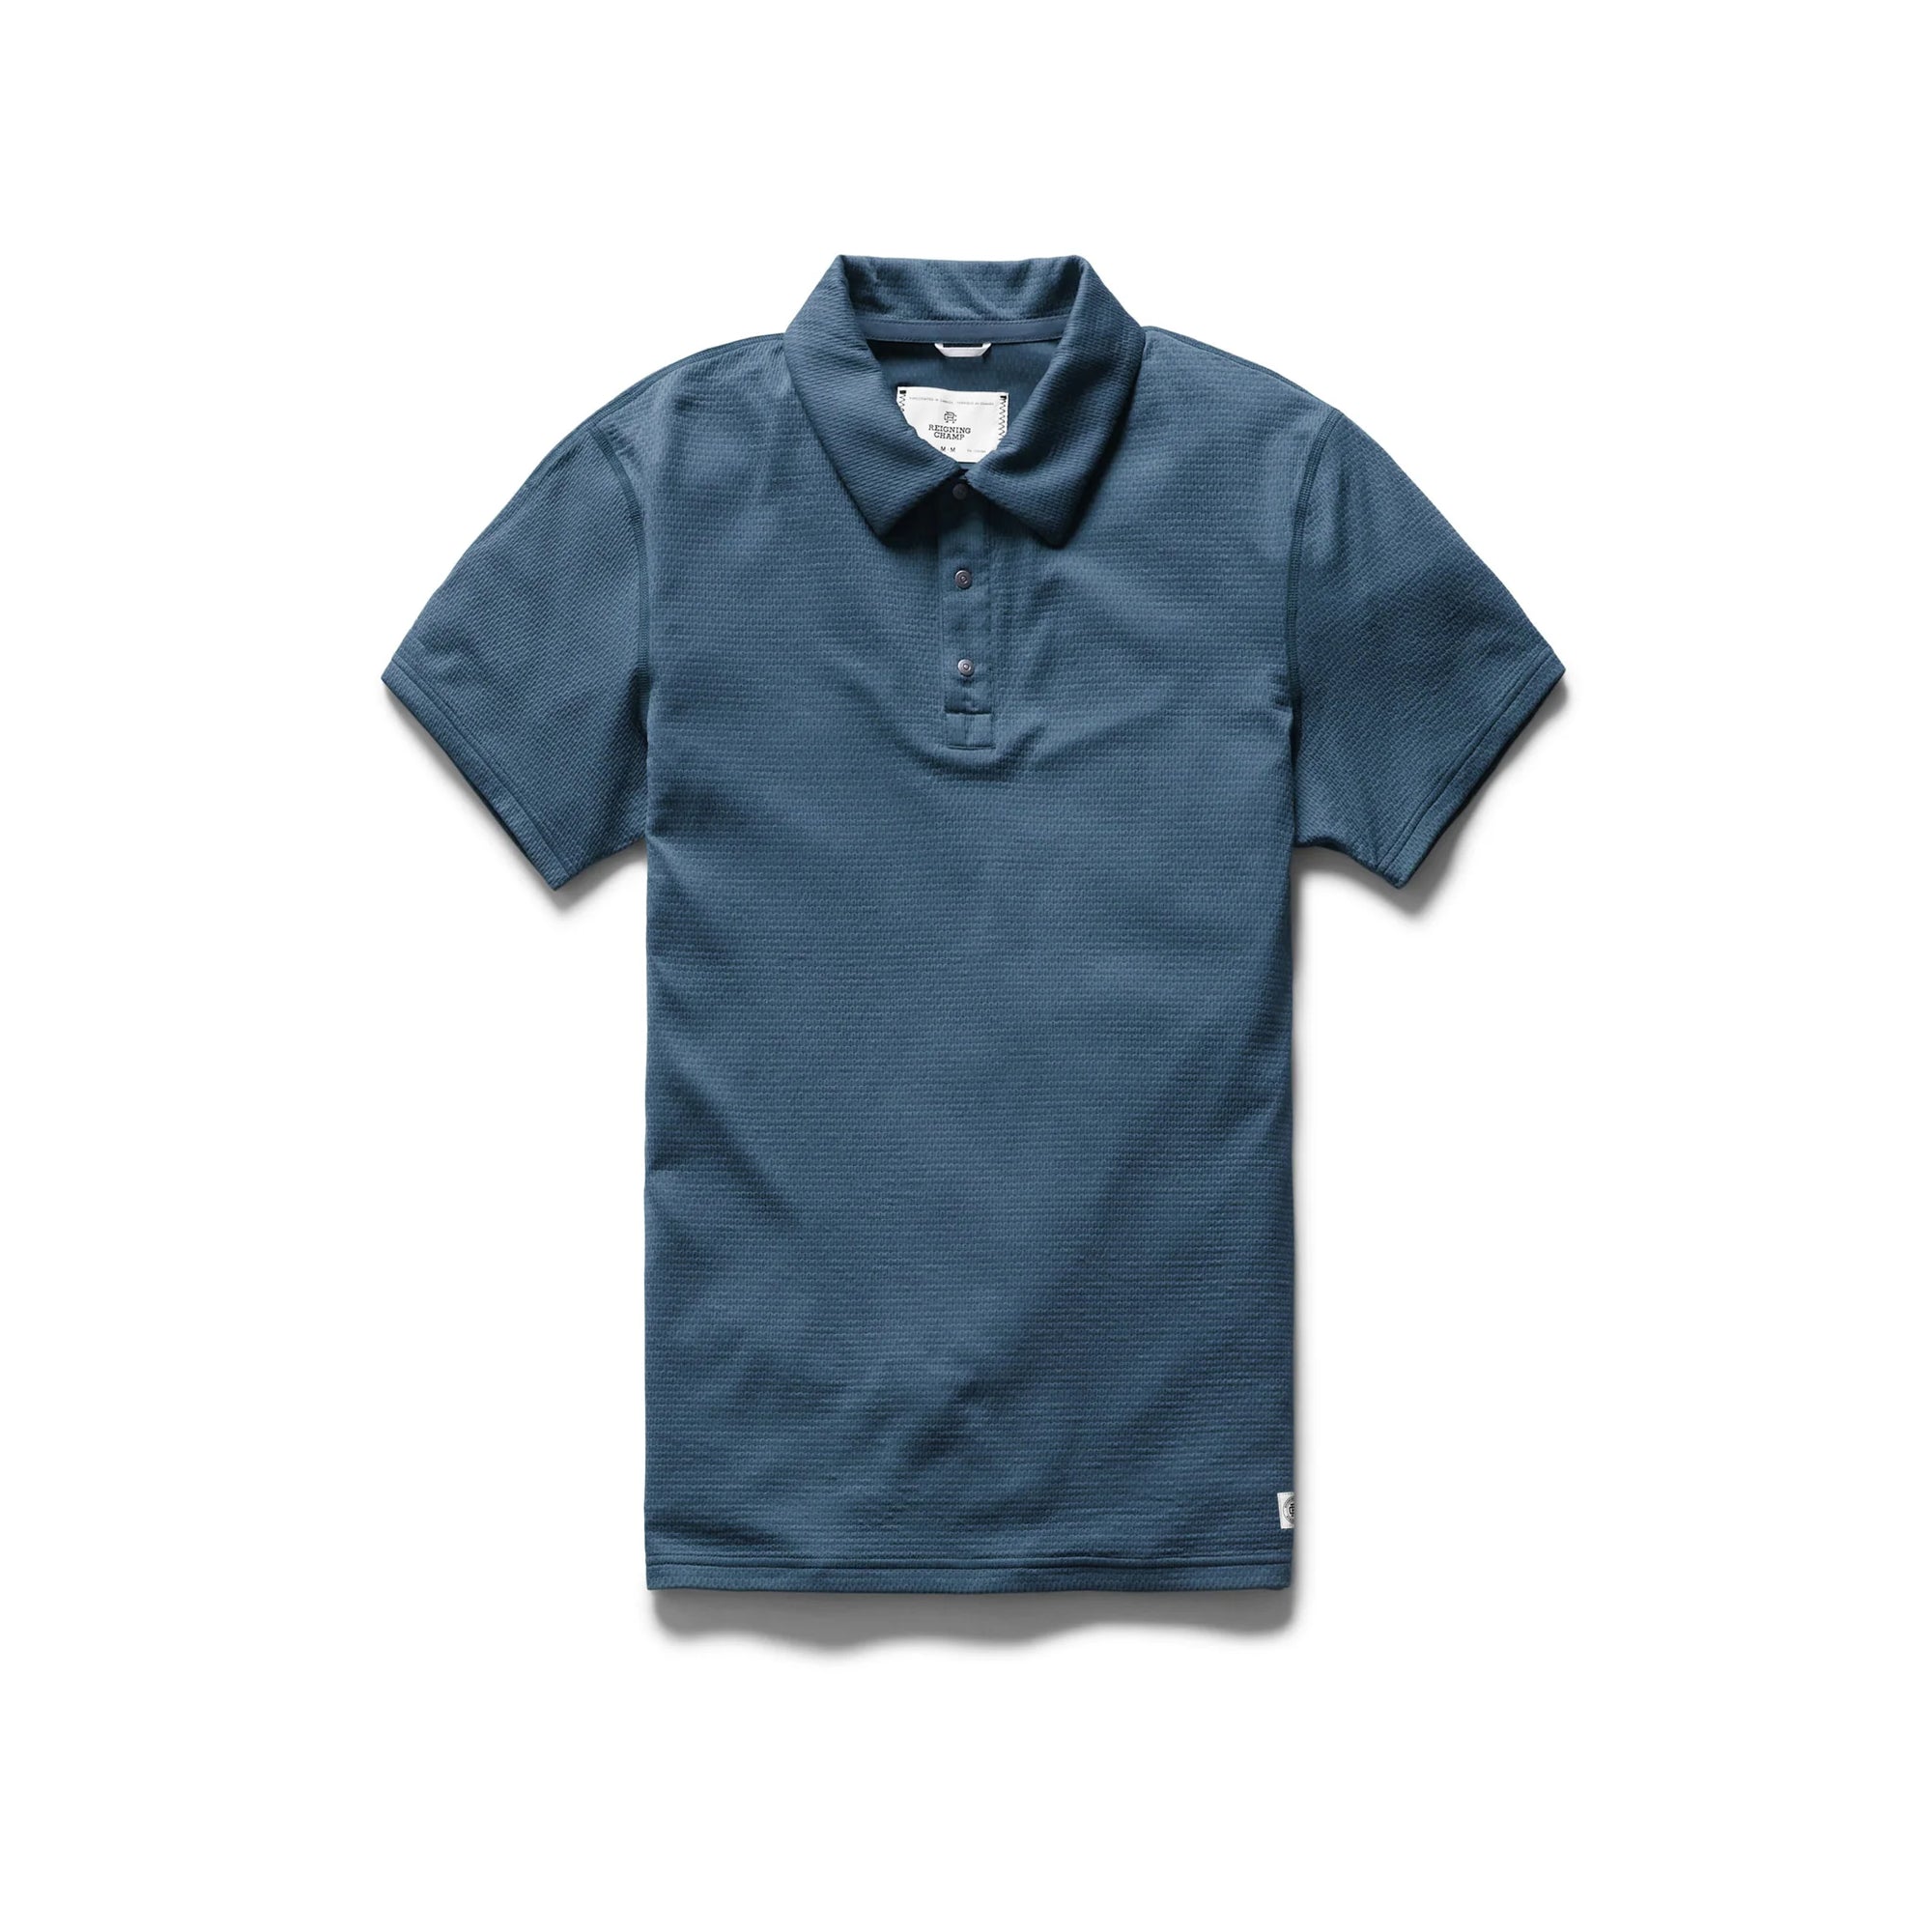 Reigning Champ Solotex Mesh Polo in Washed Blue